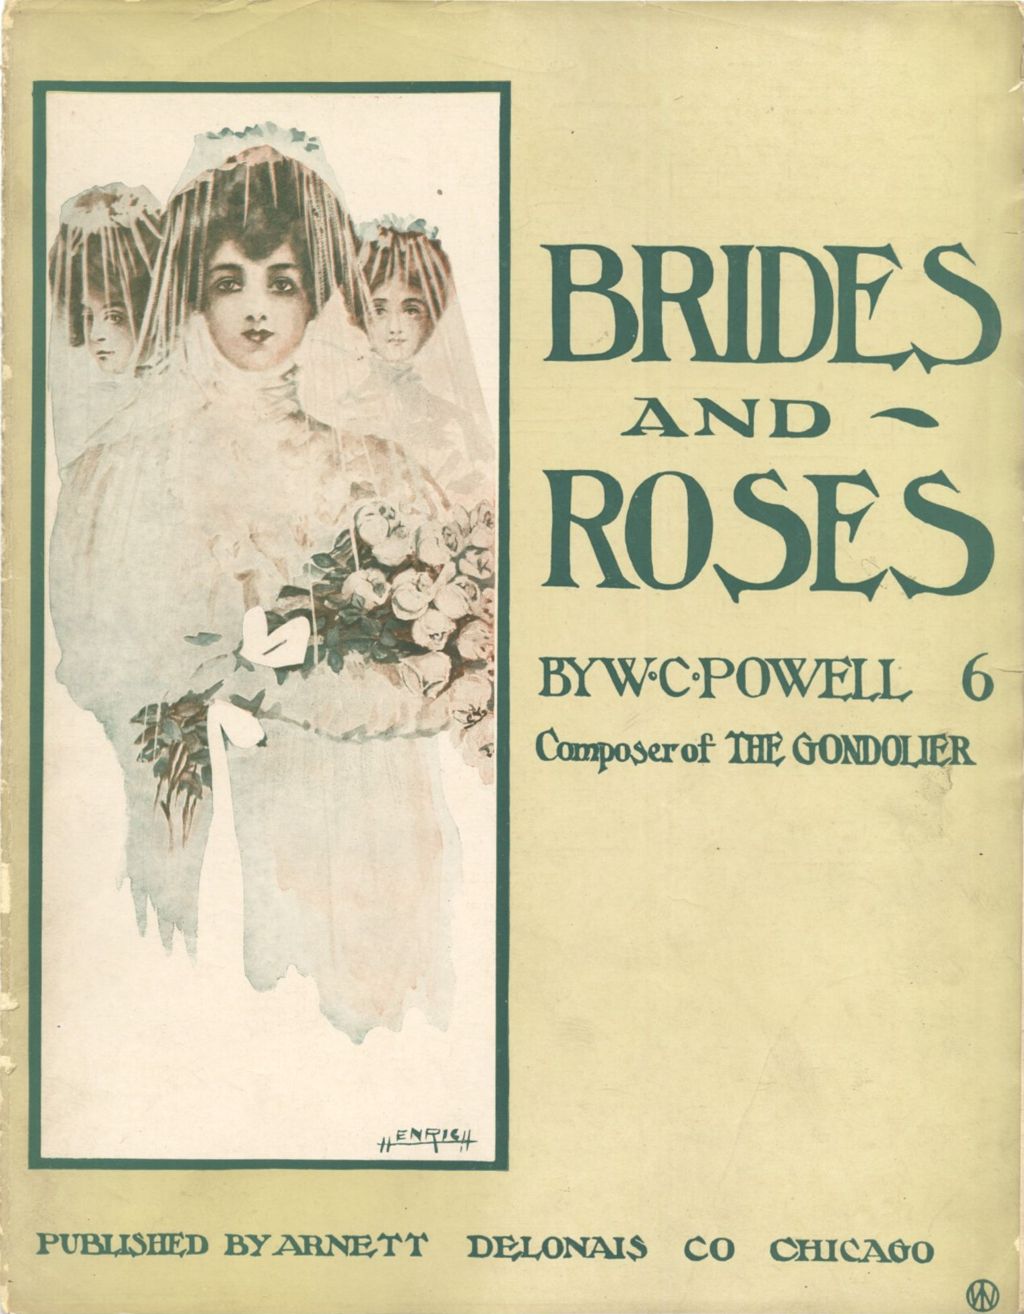 Miniature of Brides and Roses